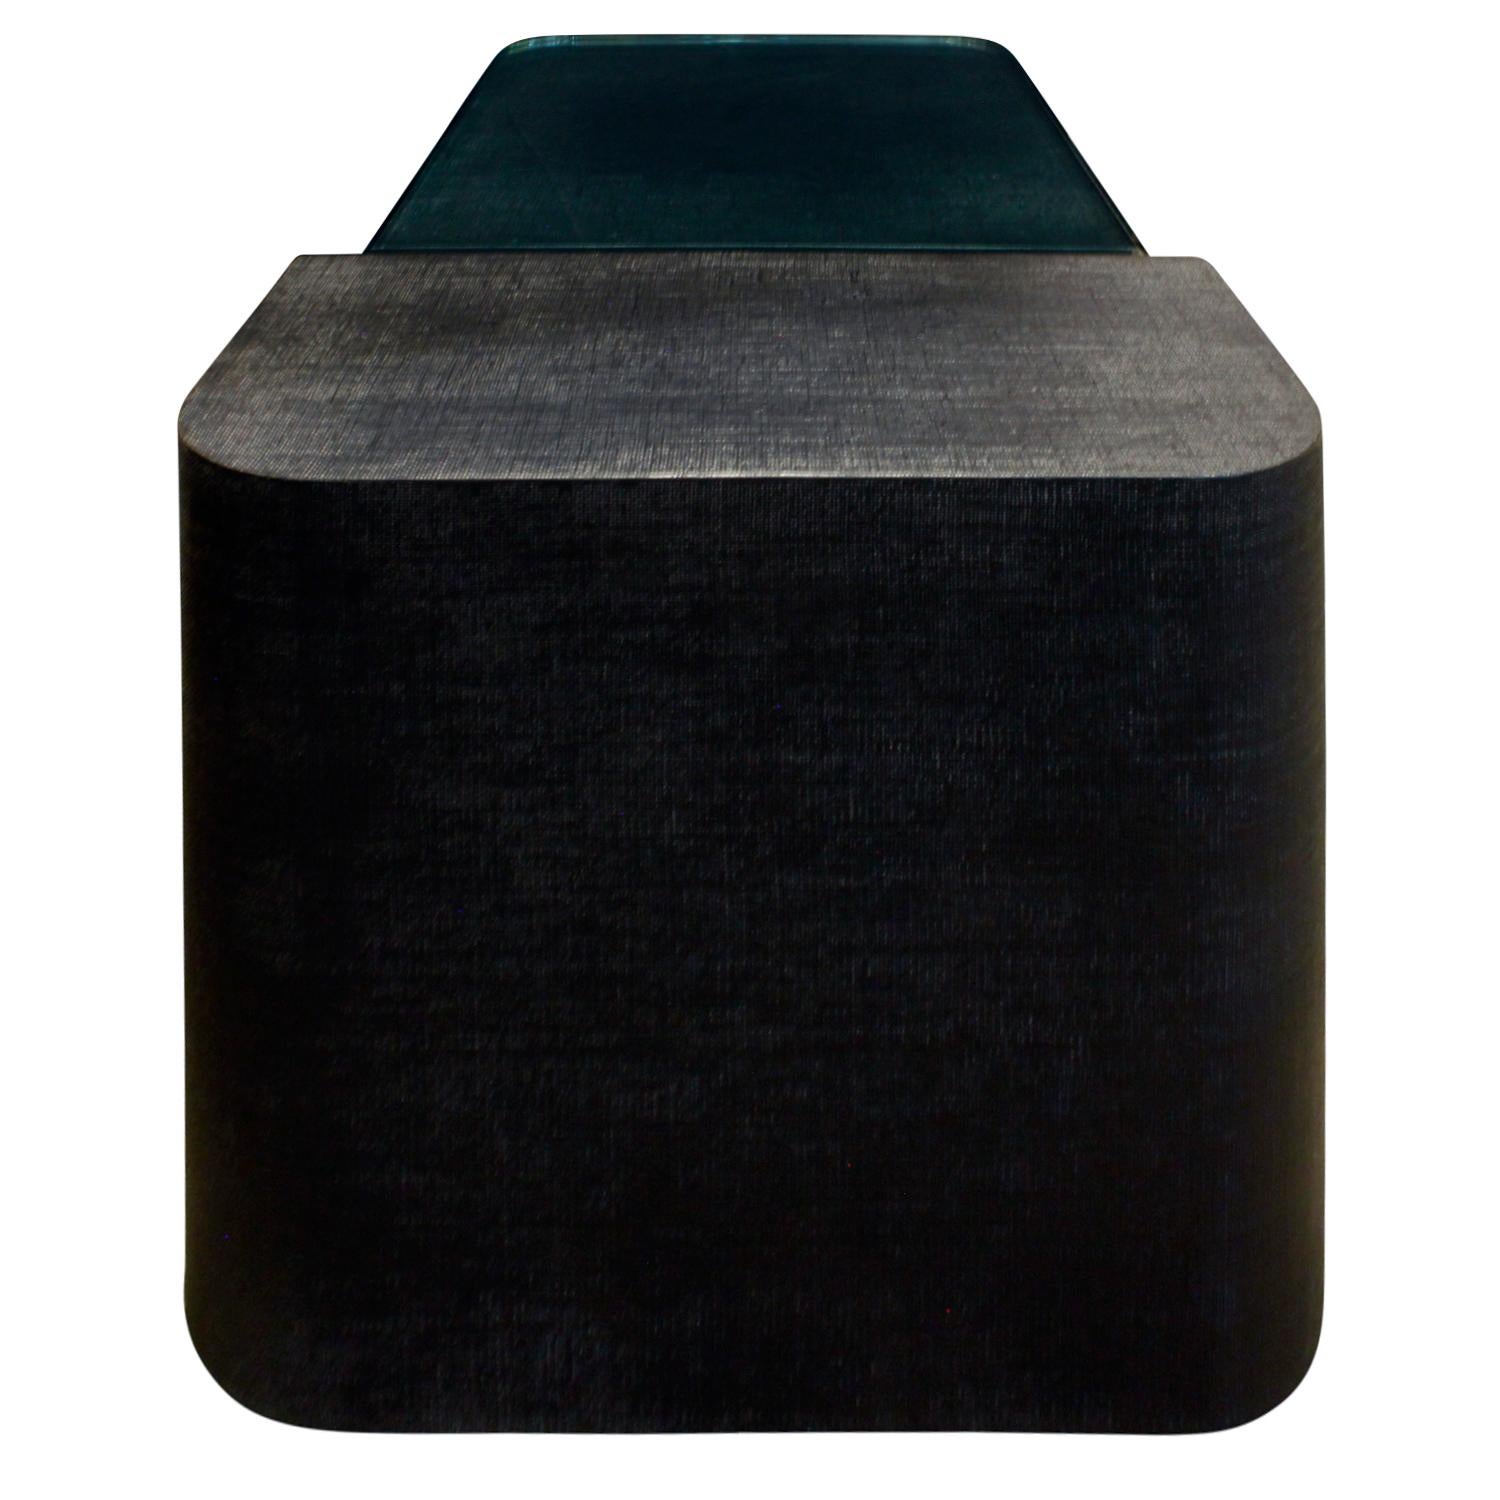 Mid-Century Modern Sculptural Coffee Table in Black Lacquered Linen and Glass, 1970s For Sale